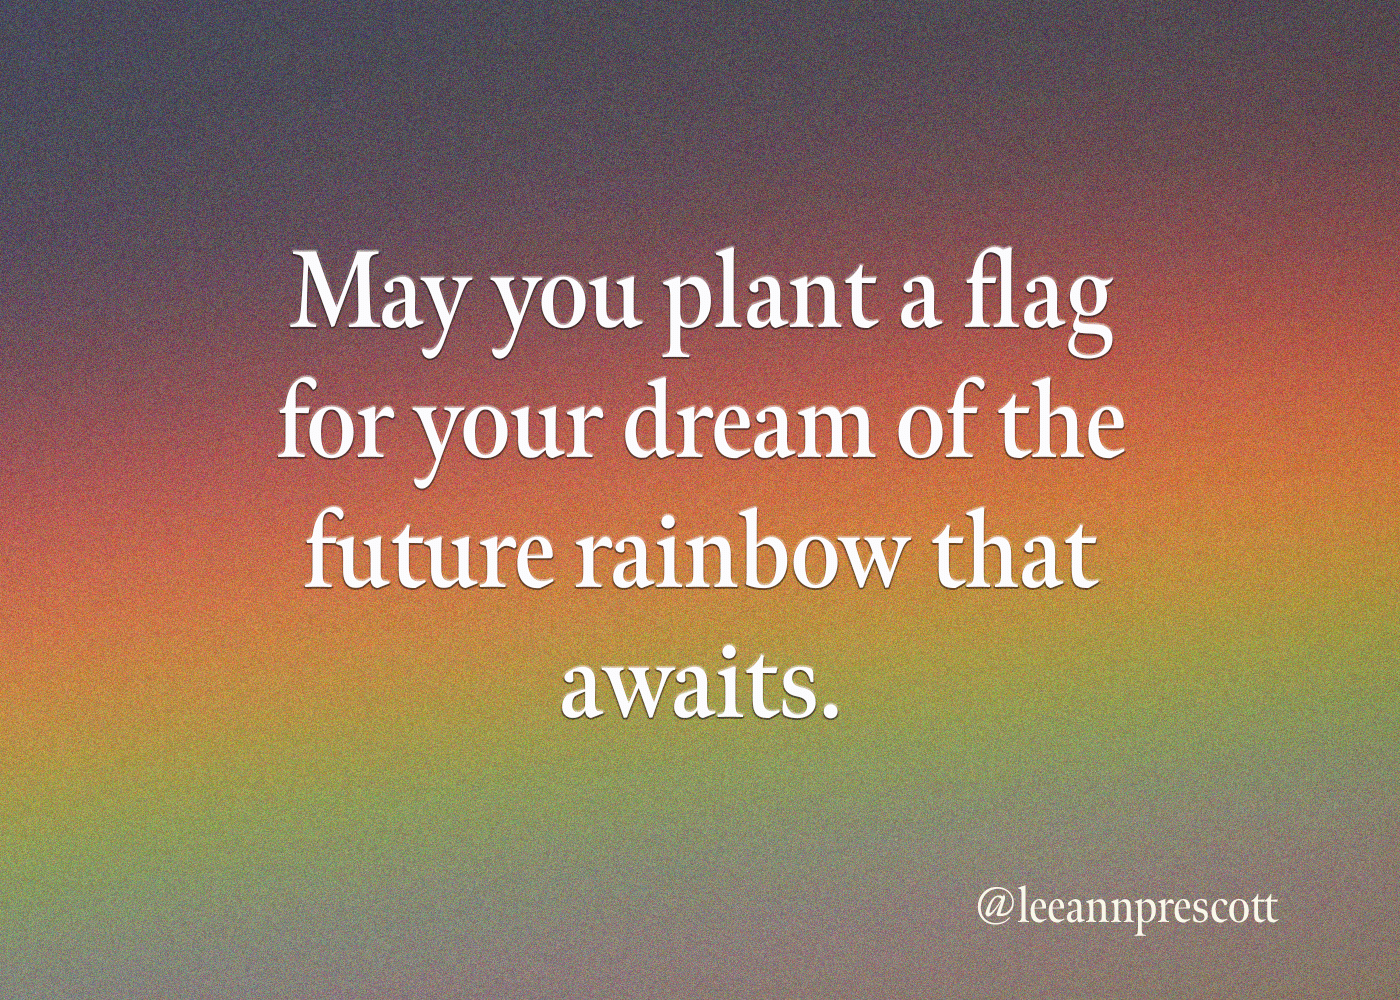 May you plant a flag for your dream of the future rainbow that awaits.